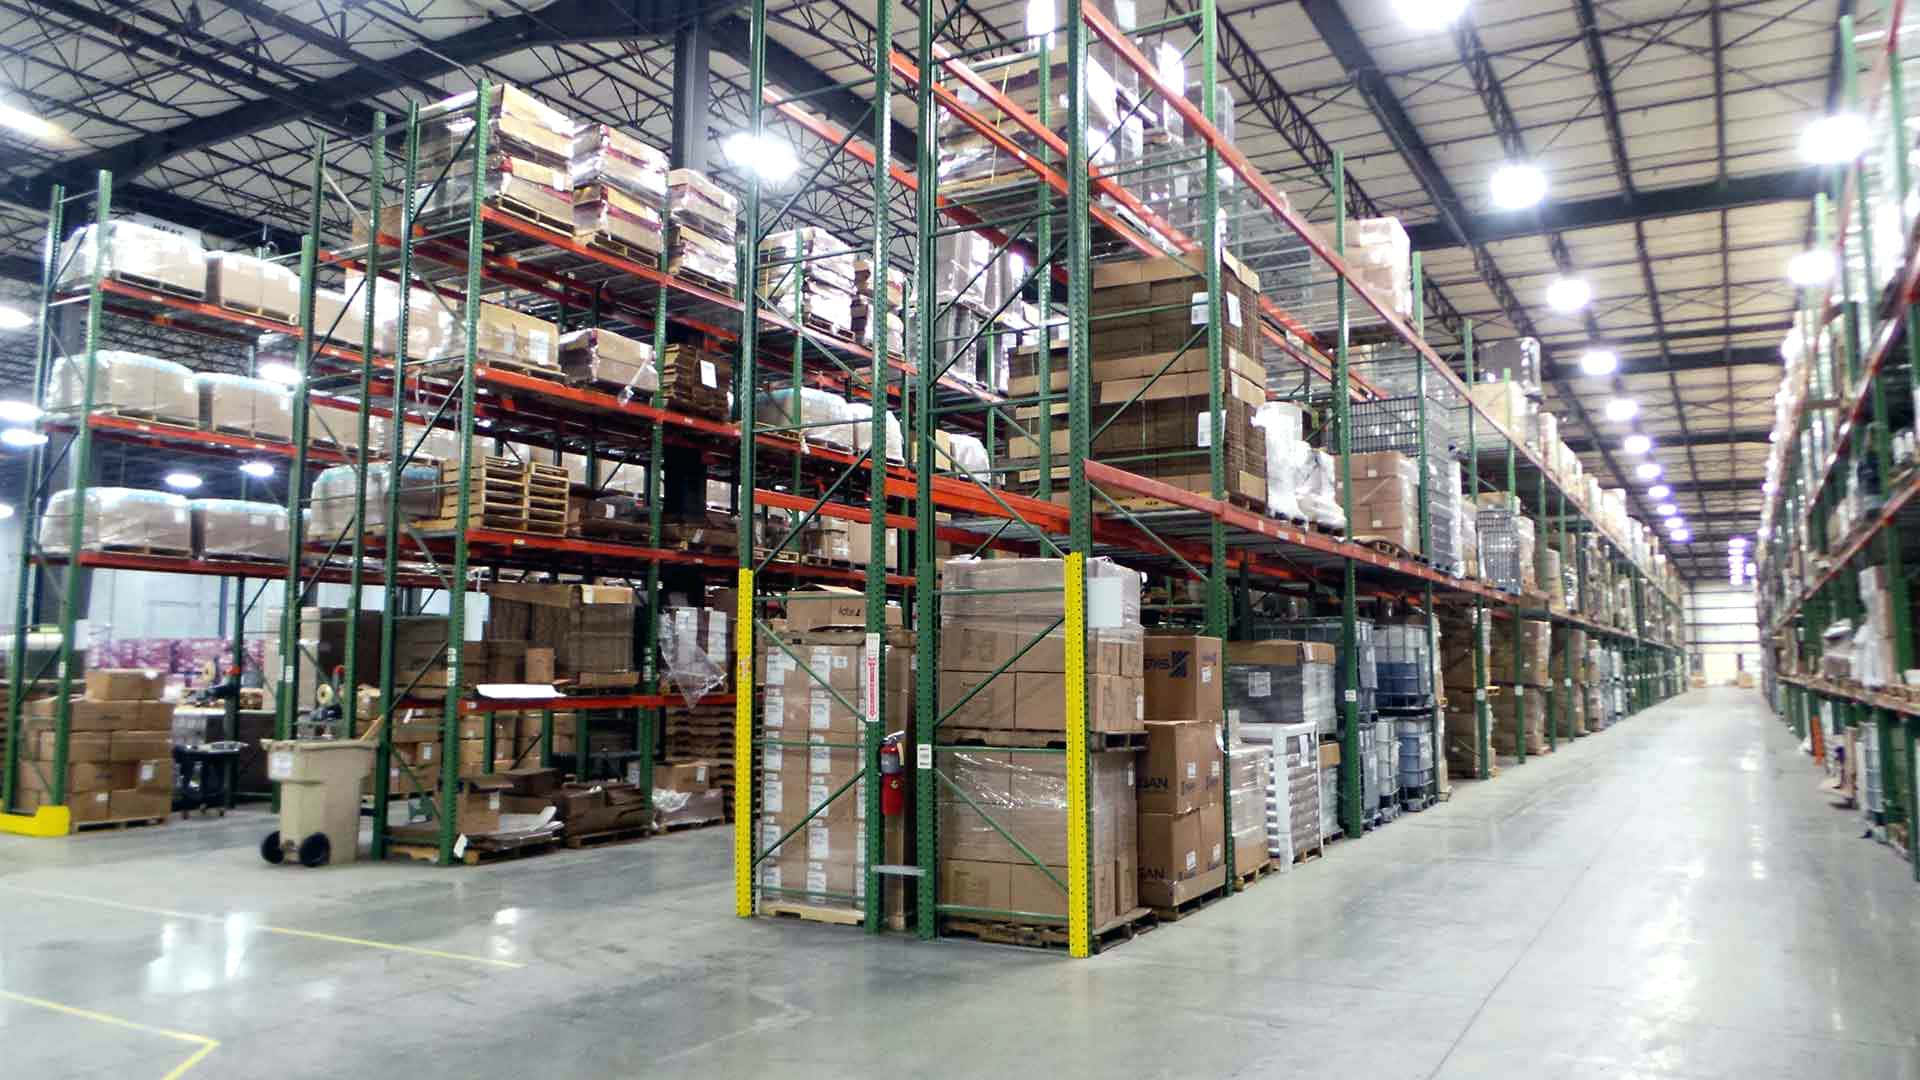 A Warehouse With Many Shelves And Boxes